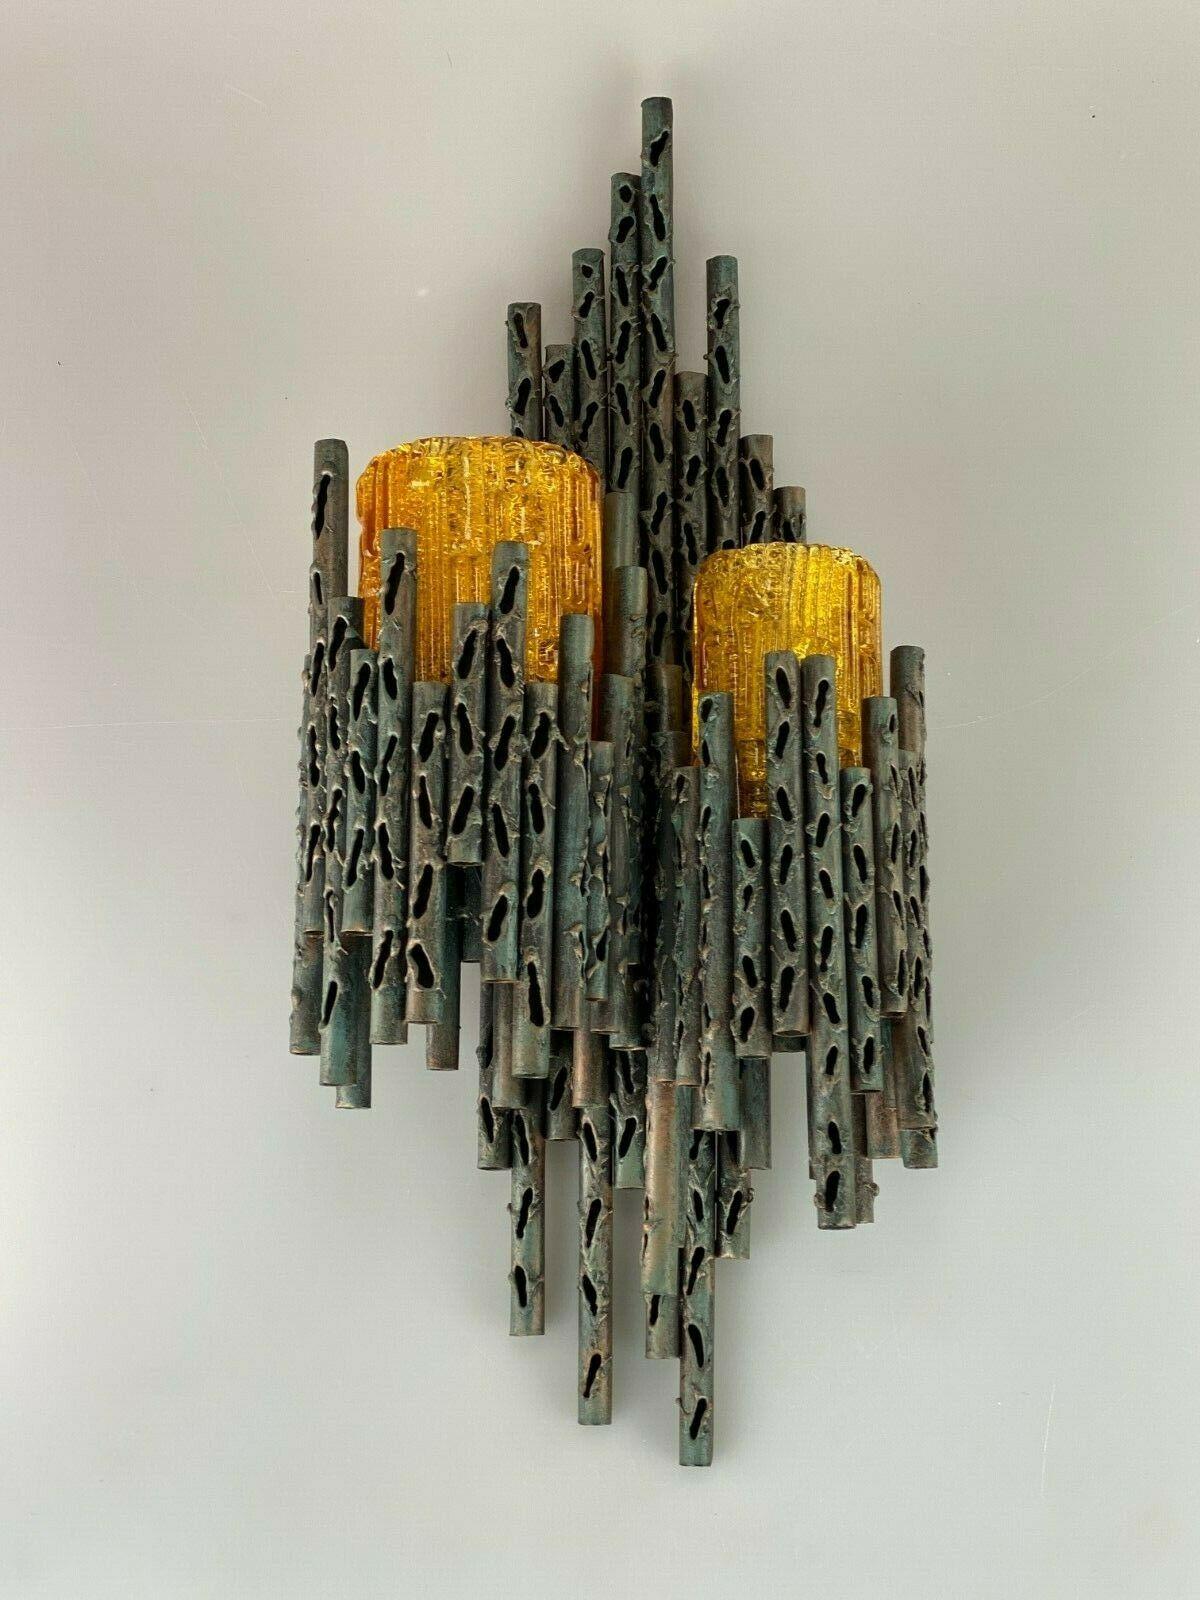 60s 70s Brutalist wall lamp Marcello Fantoni wall lamp glass design 60s

Object: wall lamp

Manufacturer: Marcello Fantoni

Condition: good

Age: around 1960-1970

Dimensions:

26cm x 59cm x 15cm

Other notes:

The pictures serve as